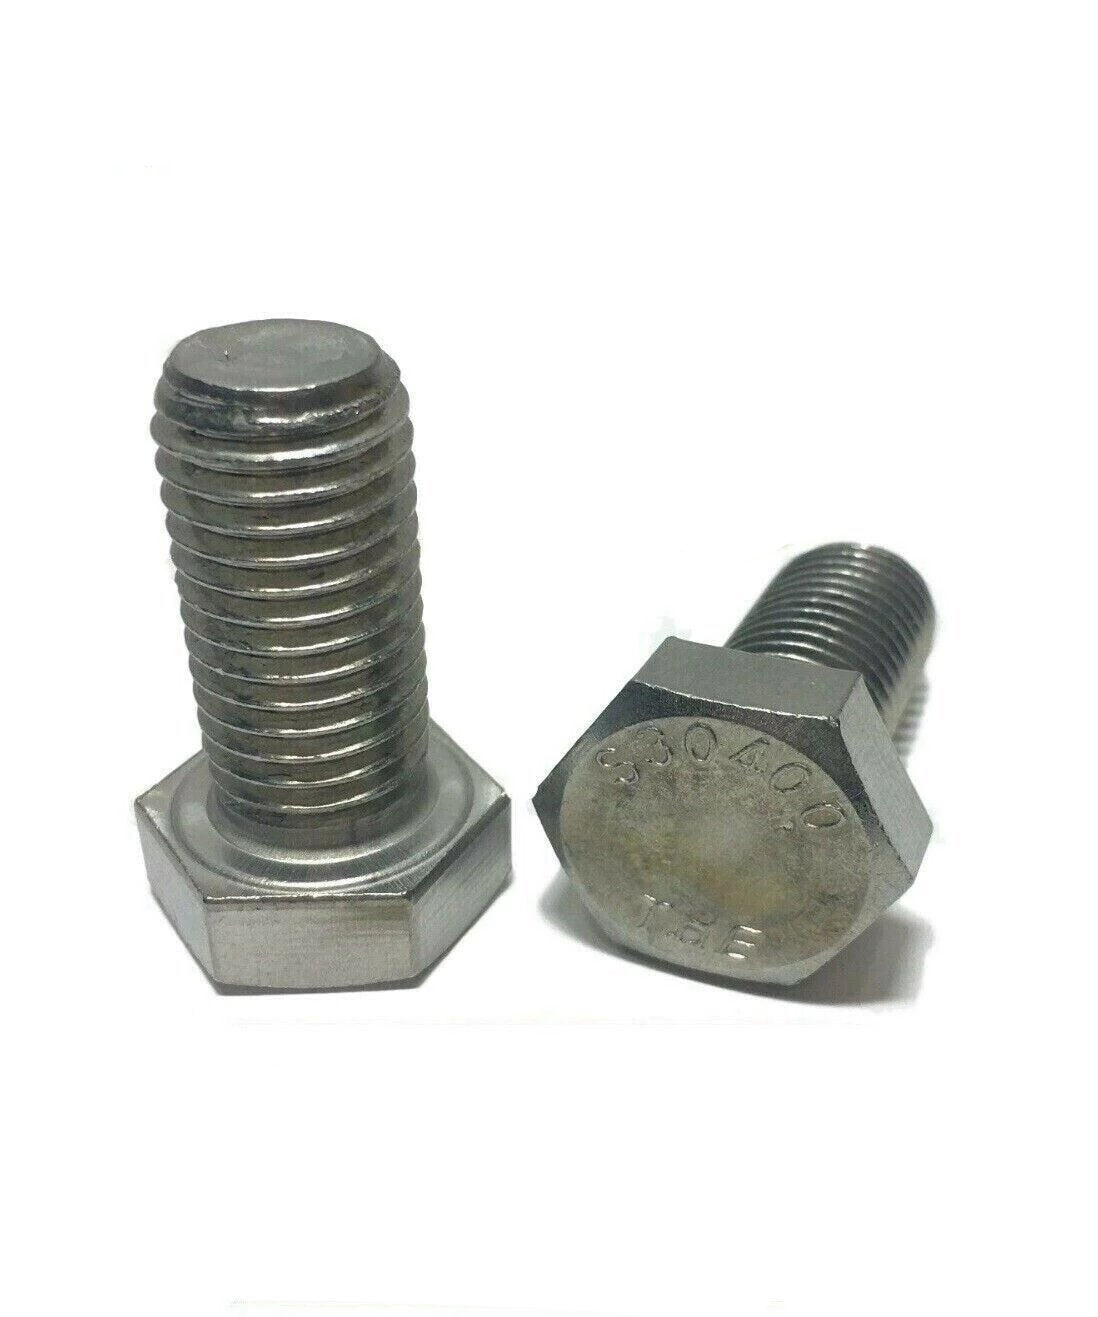 9/16"-12 x 1-1/4" Stainless Steel Hex Cap Screw / Tap Bolt 18-8 / 304